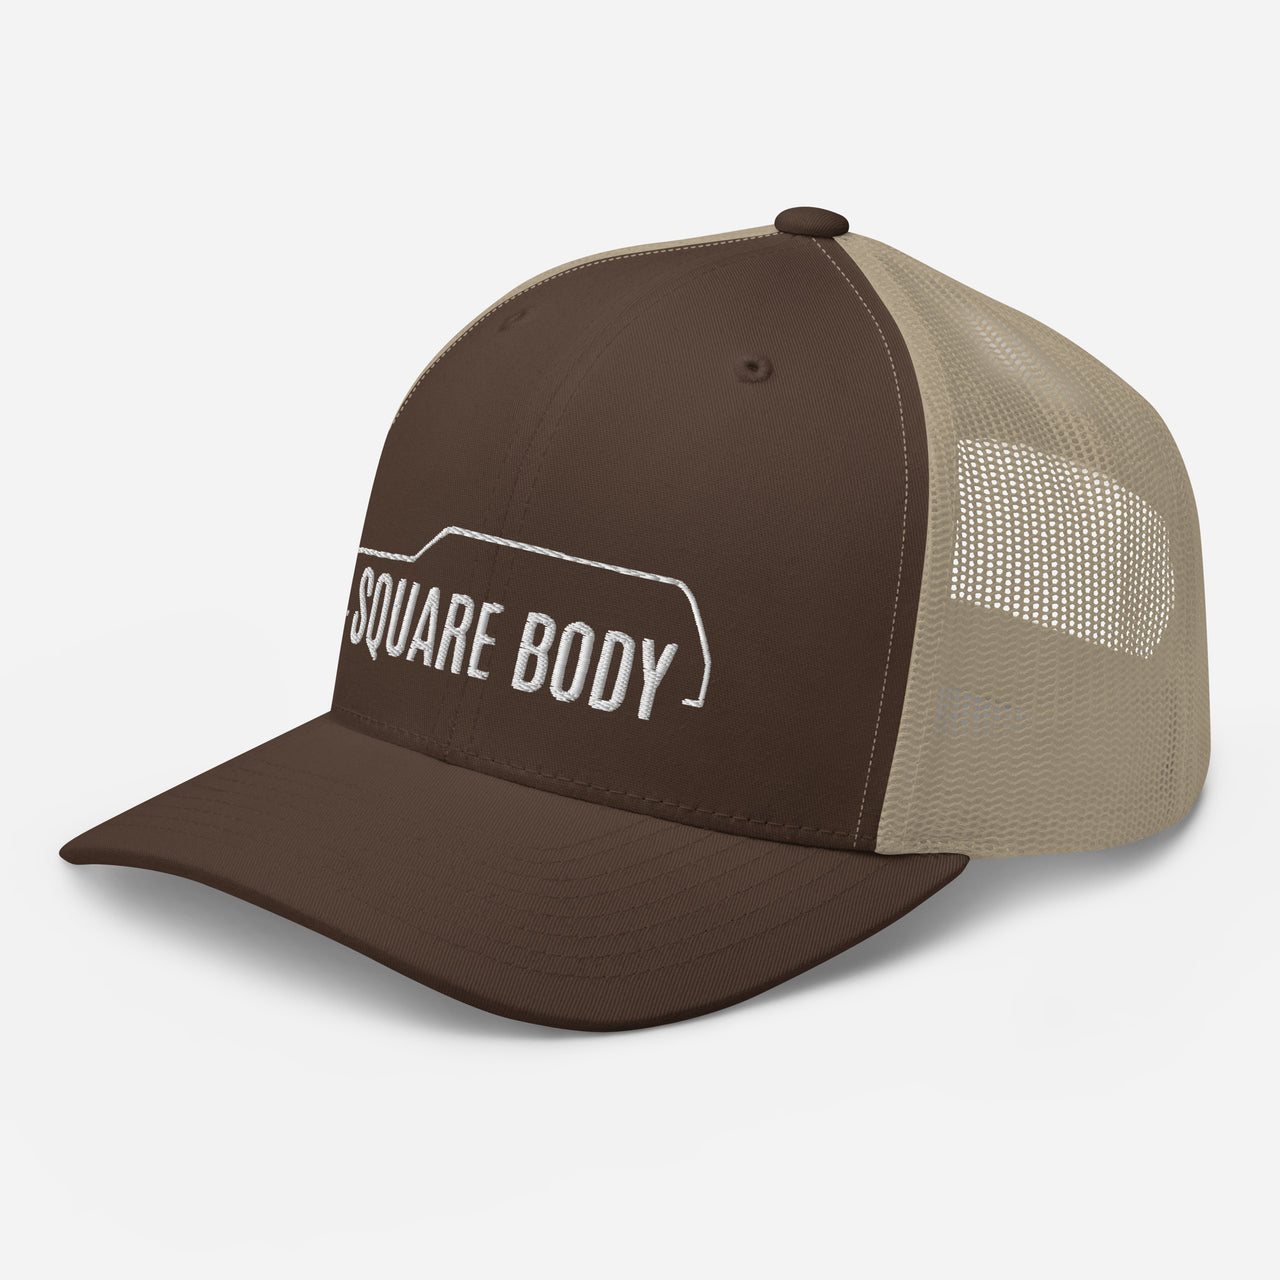 3/4 view of a square body suburban trucker hat from aggressive thread in brown